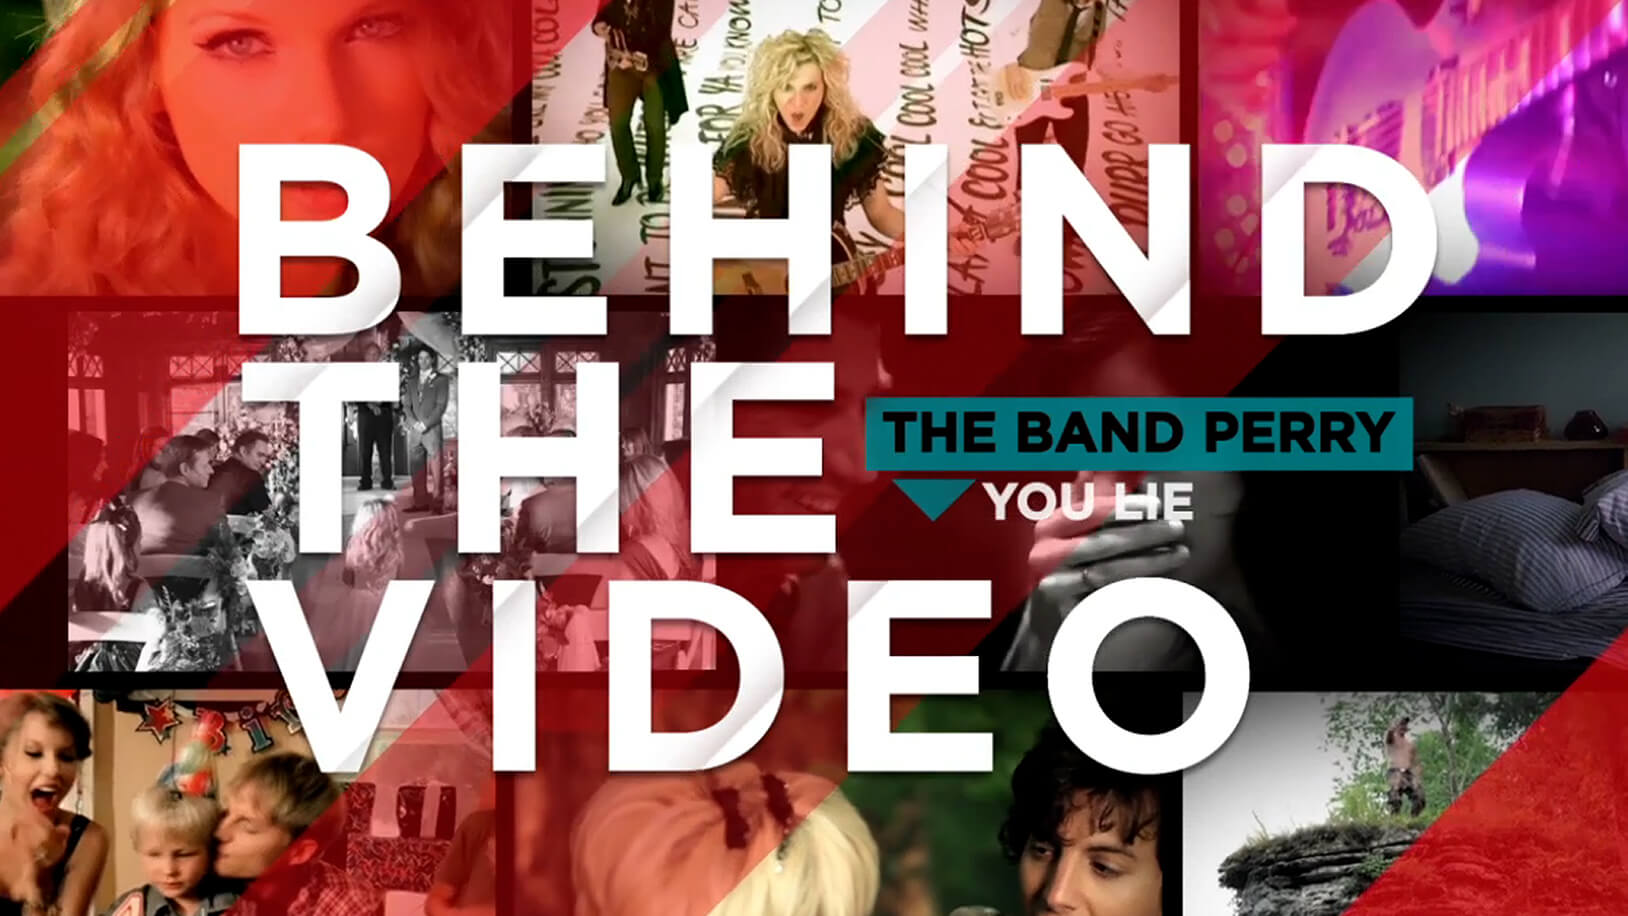 Title Card from Knoxville, TN based Great American Country's Behind the Video The Band Perry designed and animated by Nashville's ST8MNT employing angled masks, Taylor Swift, Steel Magnolia and a brady bunch filmstrip 3x3 lockup